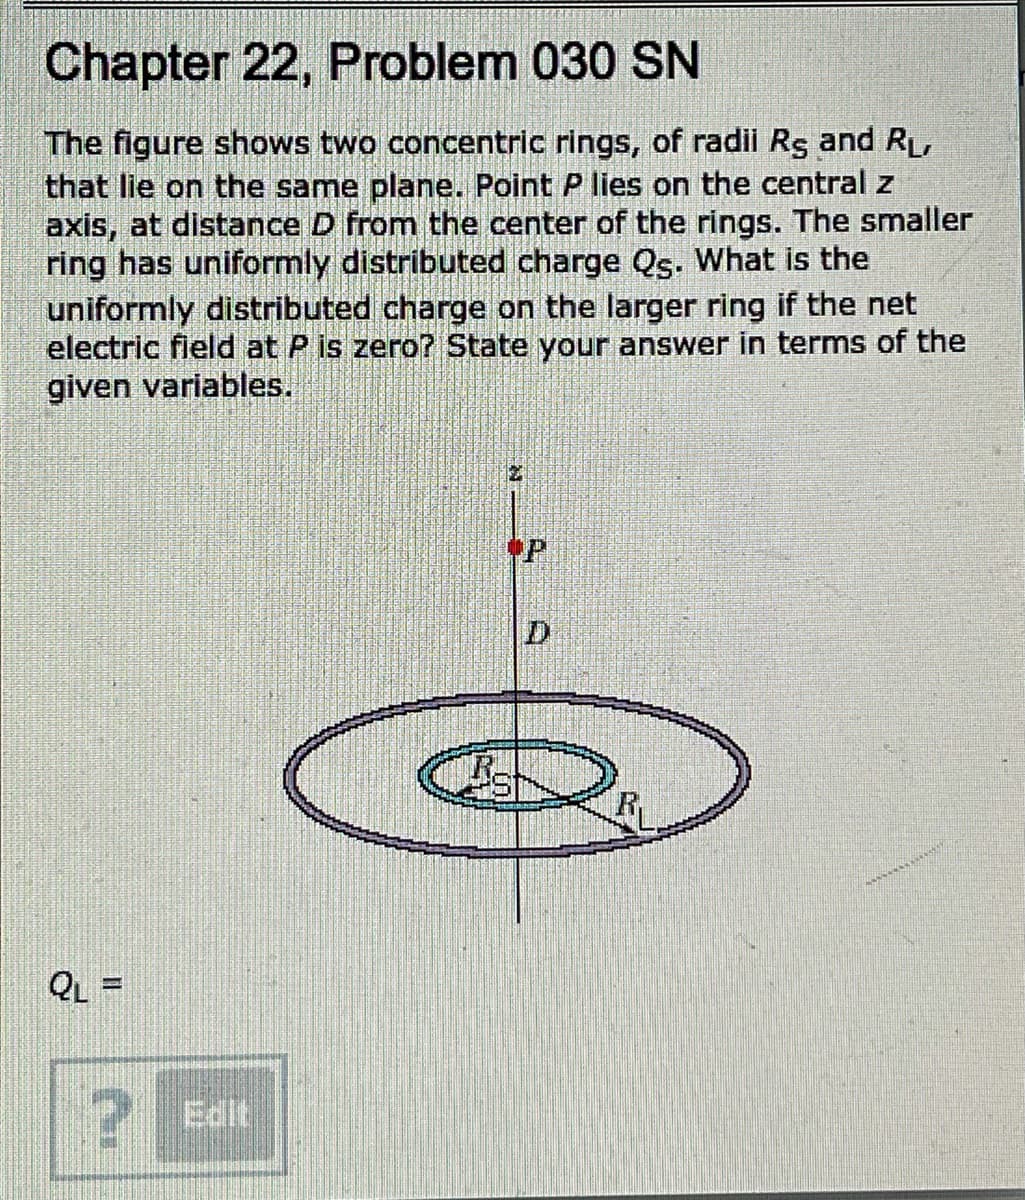 Chapter 22, Problem 030 SN
The figure shows two concentric rings, of radii Rş and RL,
that lie on the same plane. Point P lies on the central z
axis, at distance D from the center of the rings. The smaller
ring has uniformly distributed charge Qs. What is the
uniformly distributed charge on the larger ring if the net
electric field at P is zero? State your answer in terms of the
given variables.
D.
R
QL =
Edit
